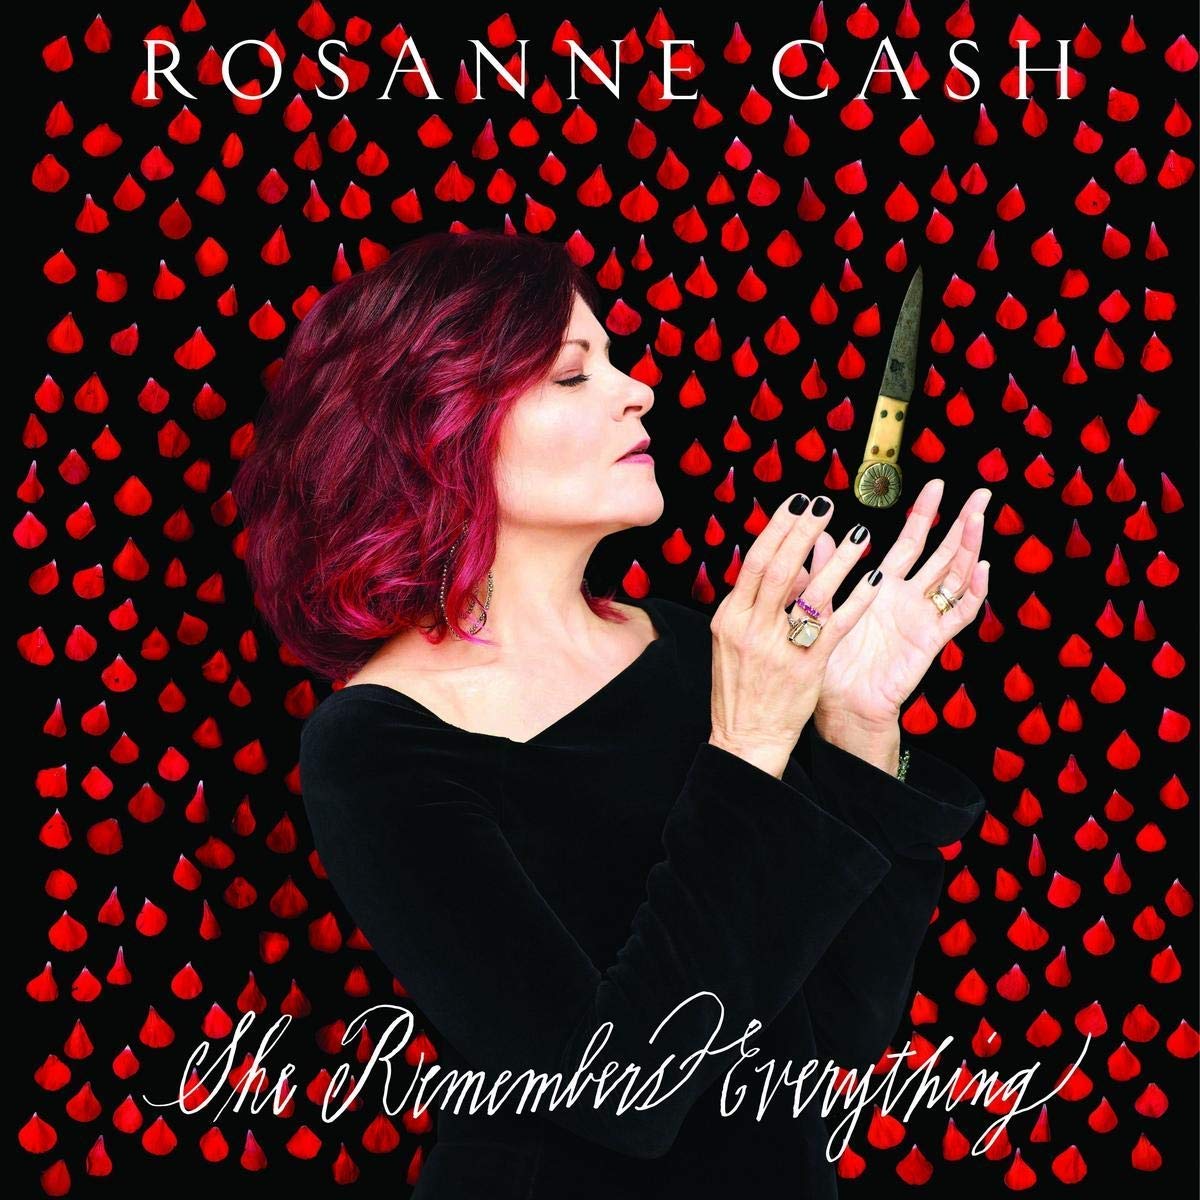 ROSANNE CASH / ロザンヌ・キャッシュ / SHE REMEMBERS EVERYTHING (CD)